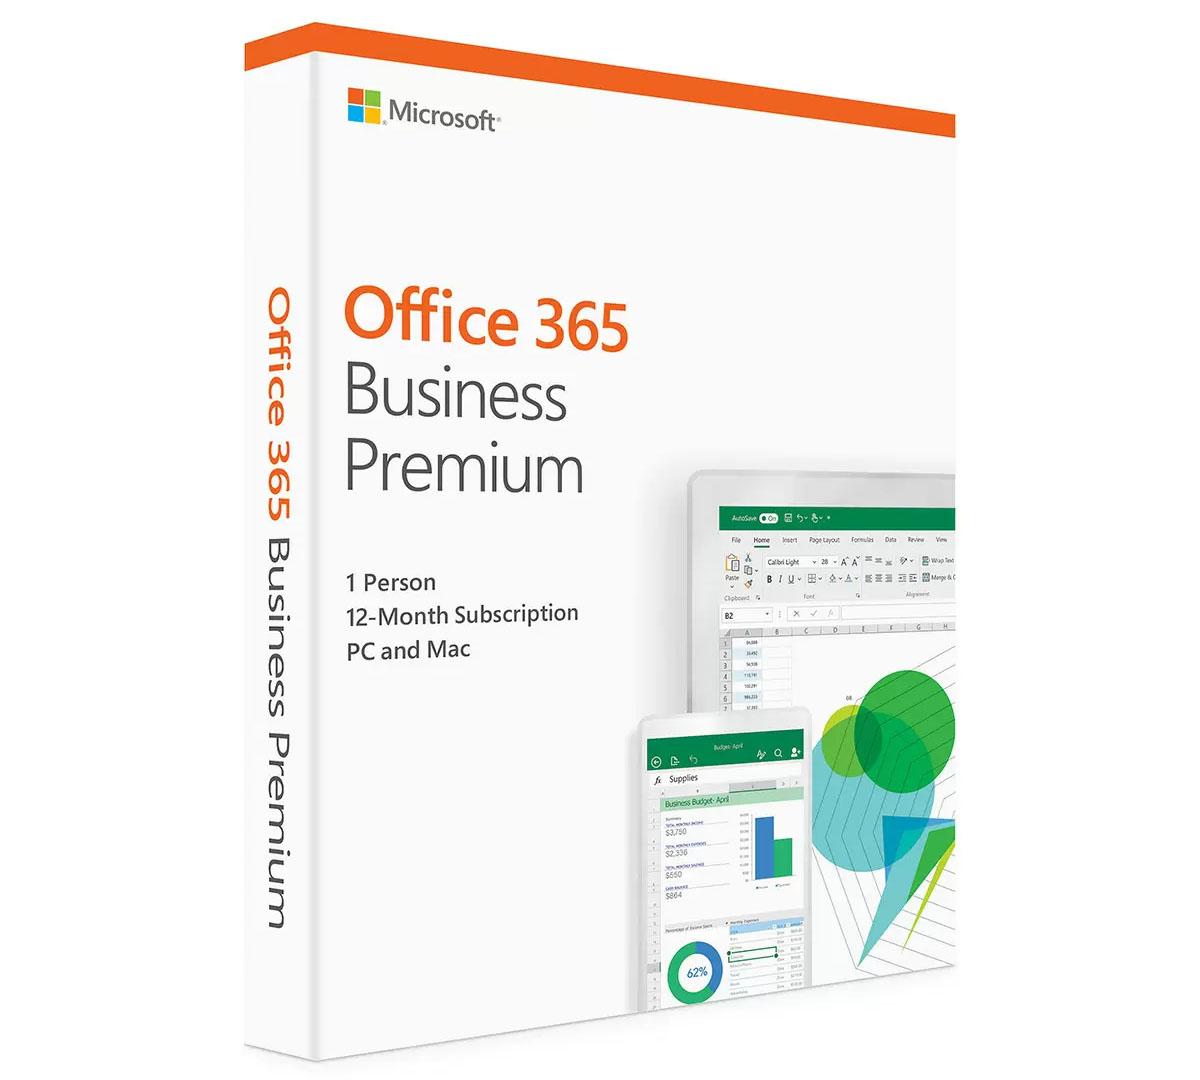 Microsoft Office 365 Business Premium 12-Month Subscription for $39.49 Shipped